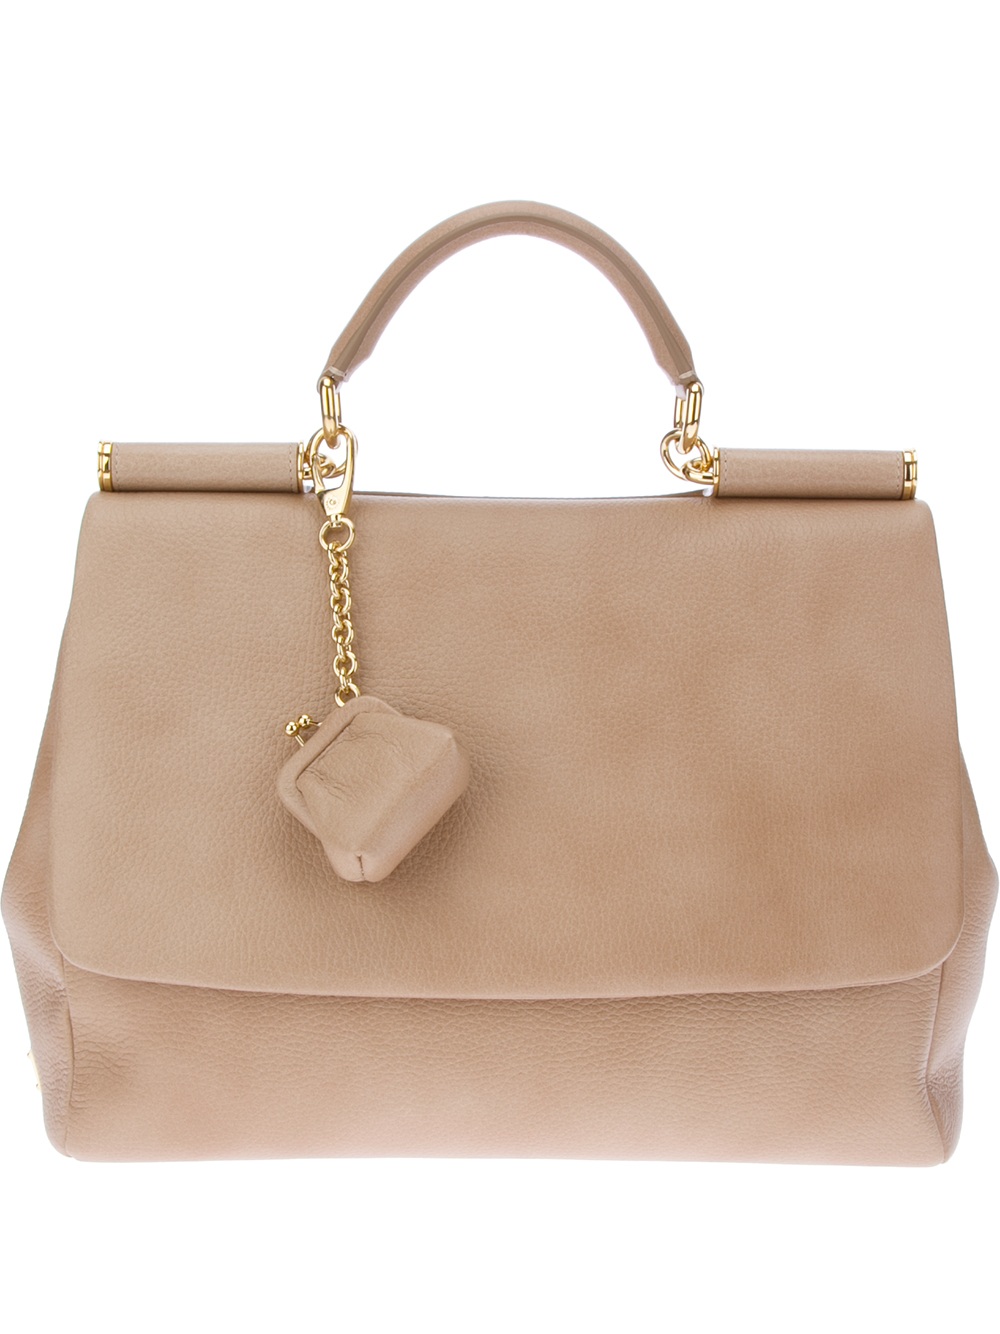 Dolce & Gabbana Tote with External Pocket in Gold | Lyst